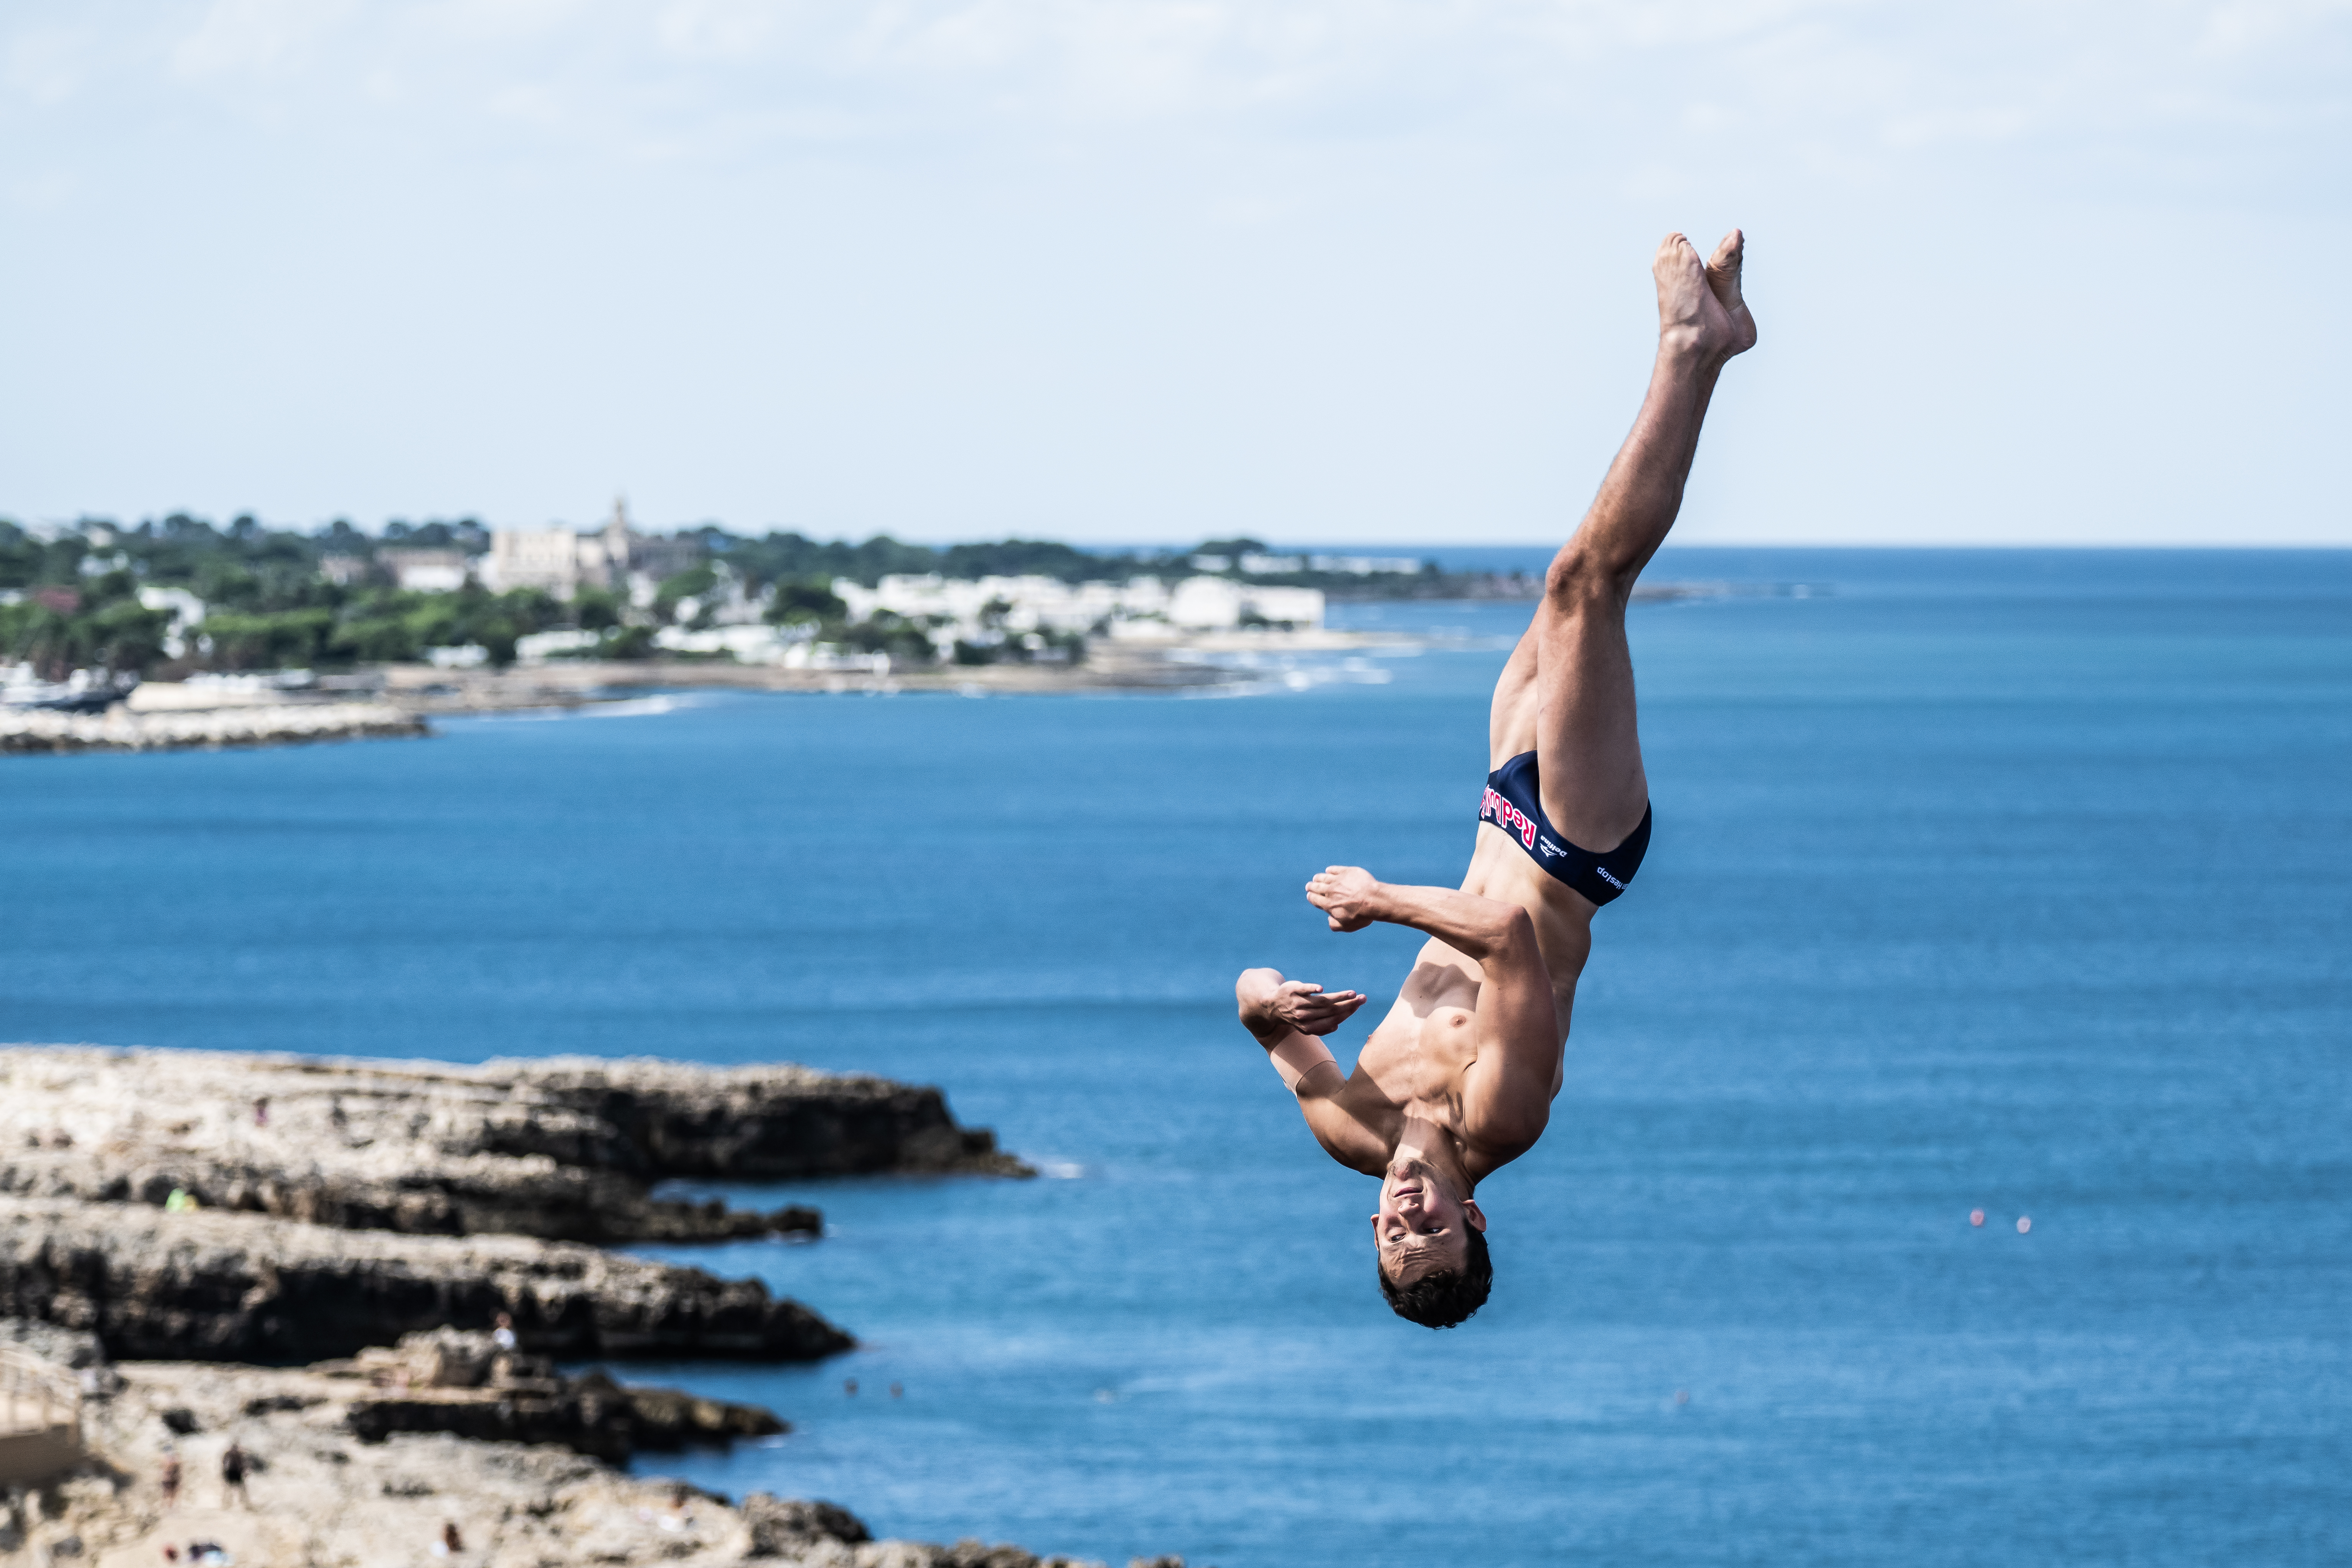 Aidan Heslop dives from the 28 metre platform during the final competition day of the seventh stop of the Red Bull Cliff Diving World Series at Polignano a Mare, Italy.